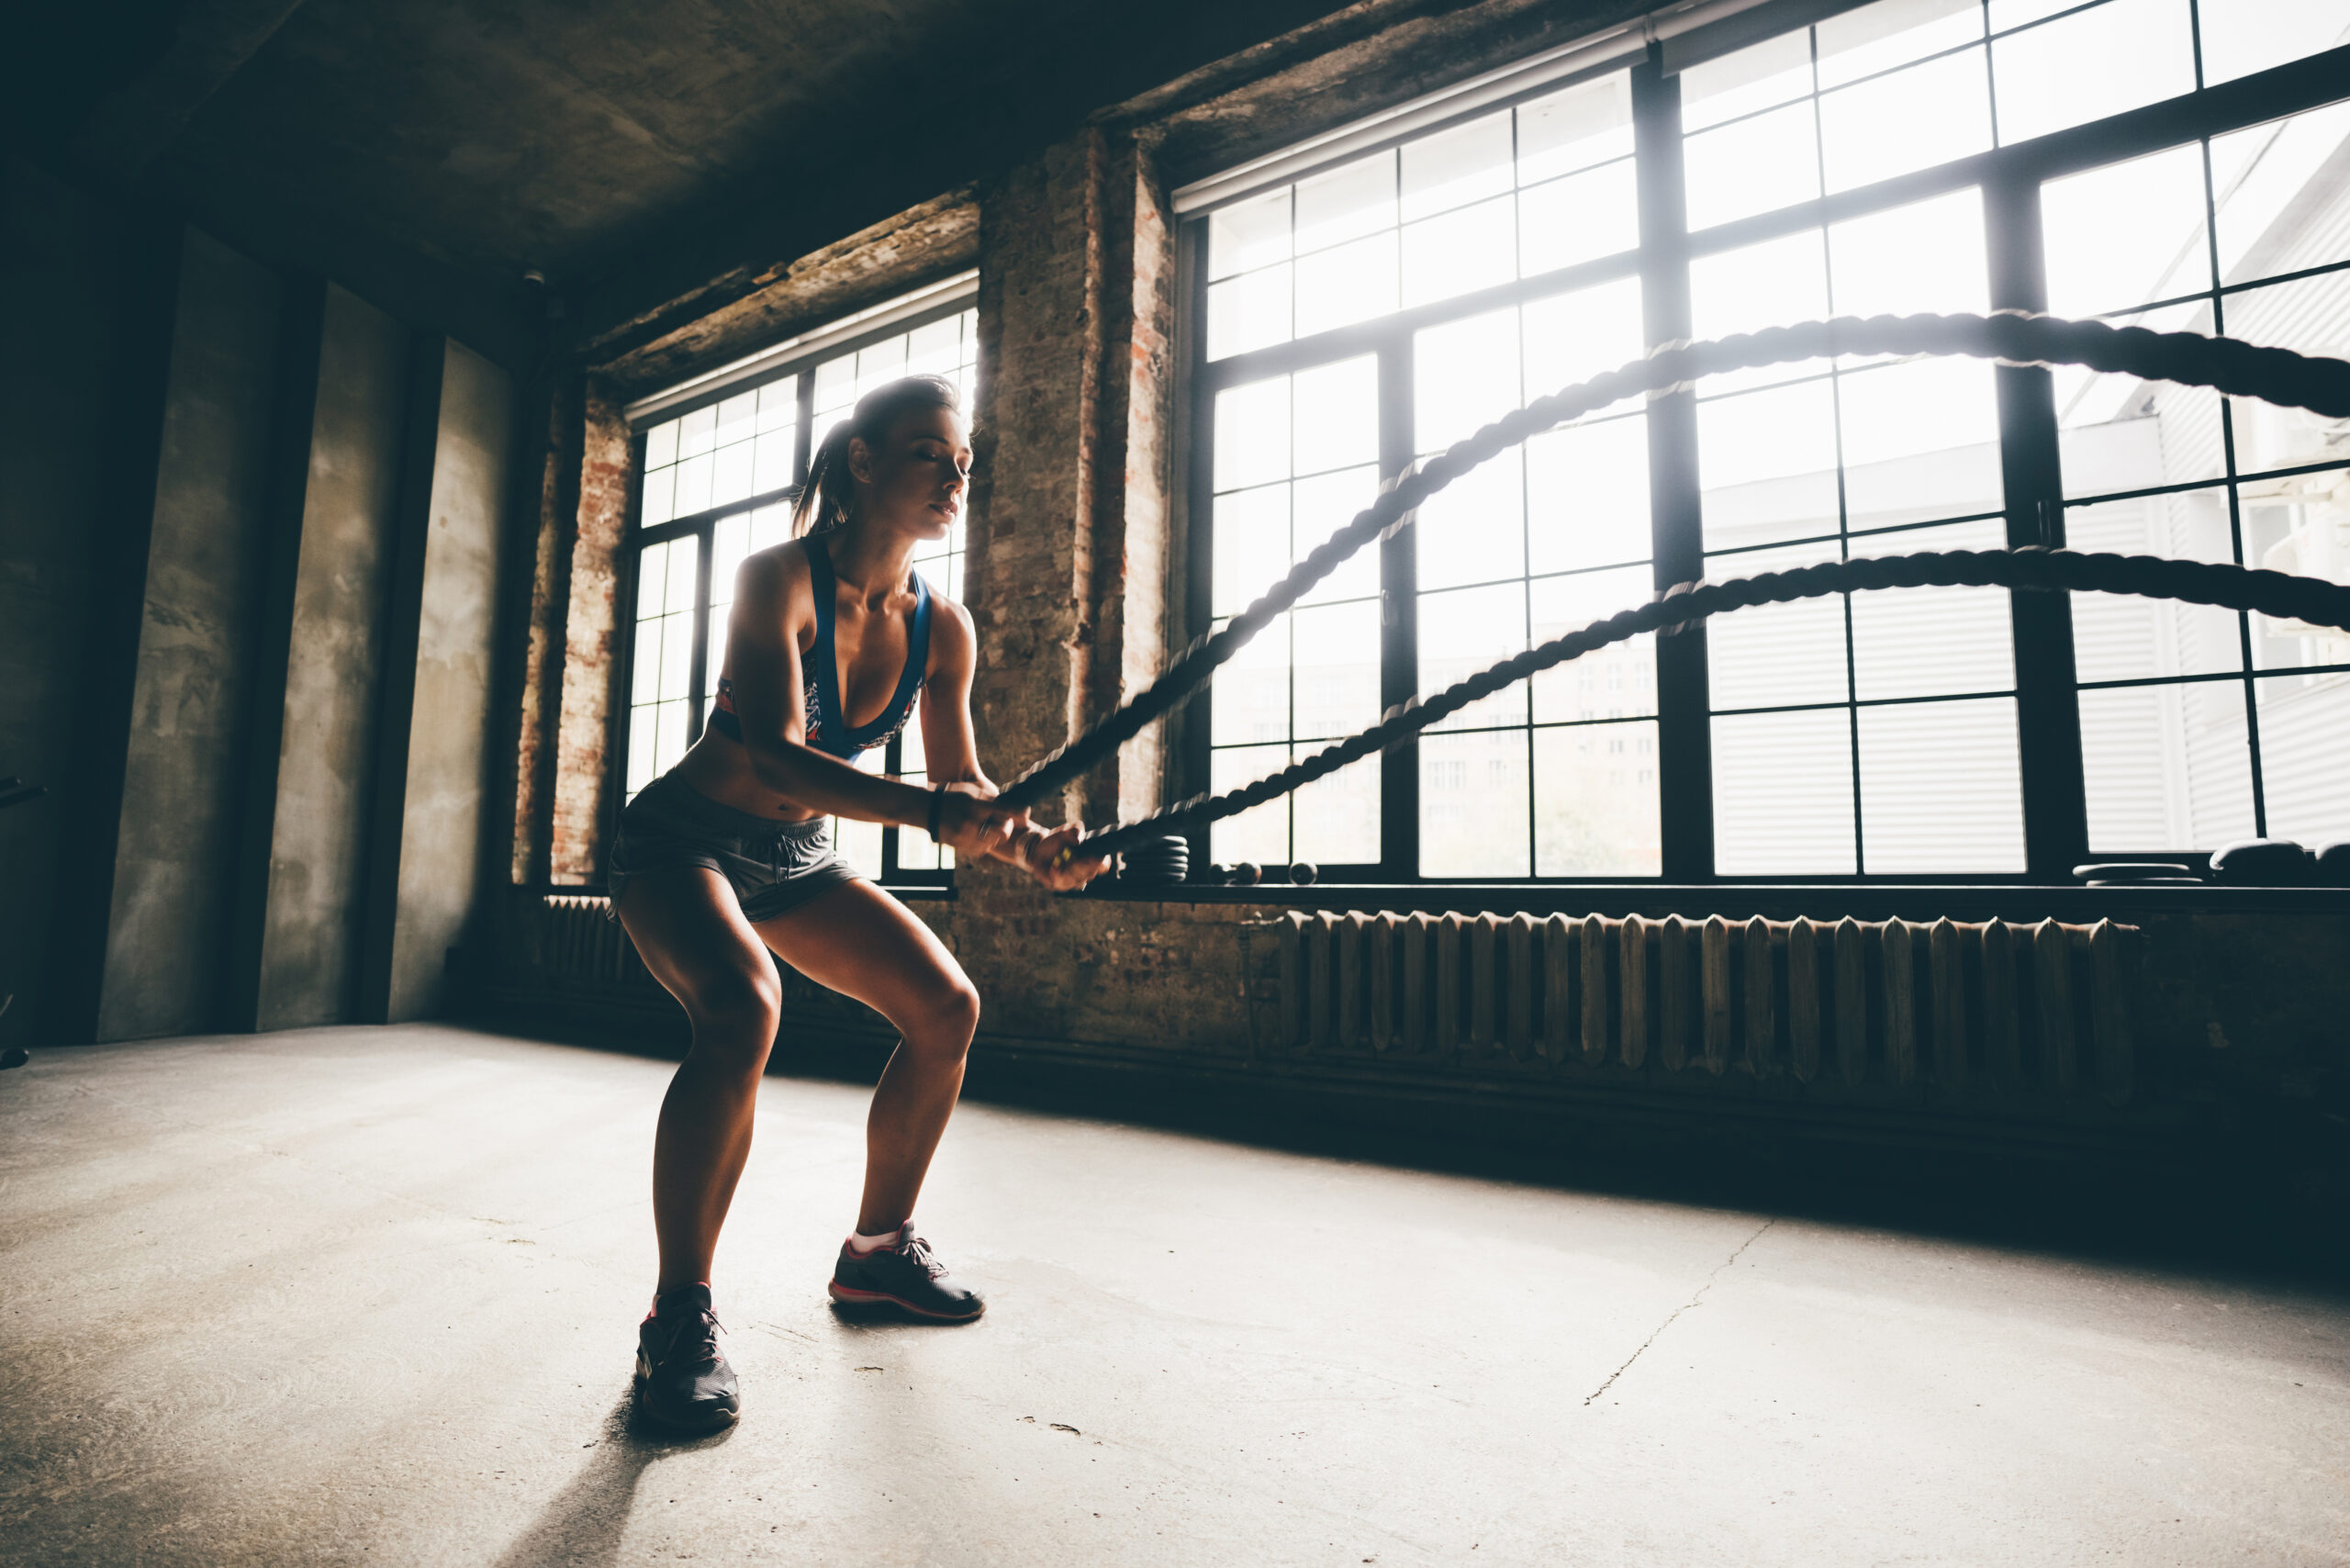 Fitness girl exercising with battle ropes at gym. Woman training doing battling rope workout working out arms and cardio for cross fit exercises.